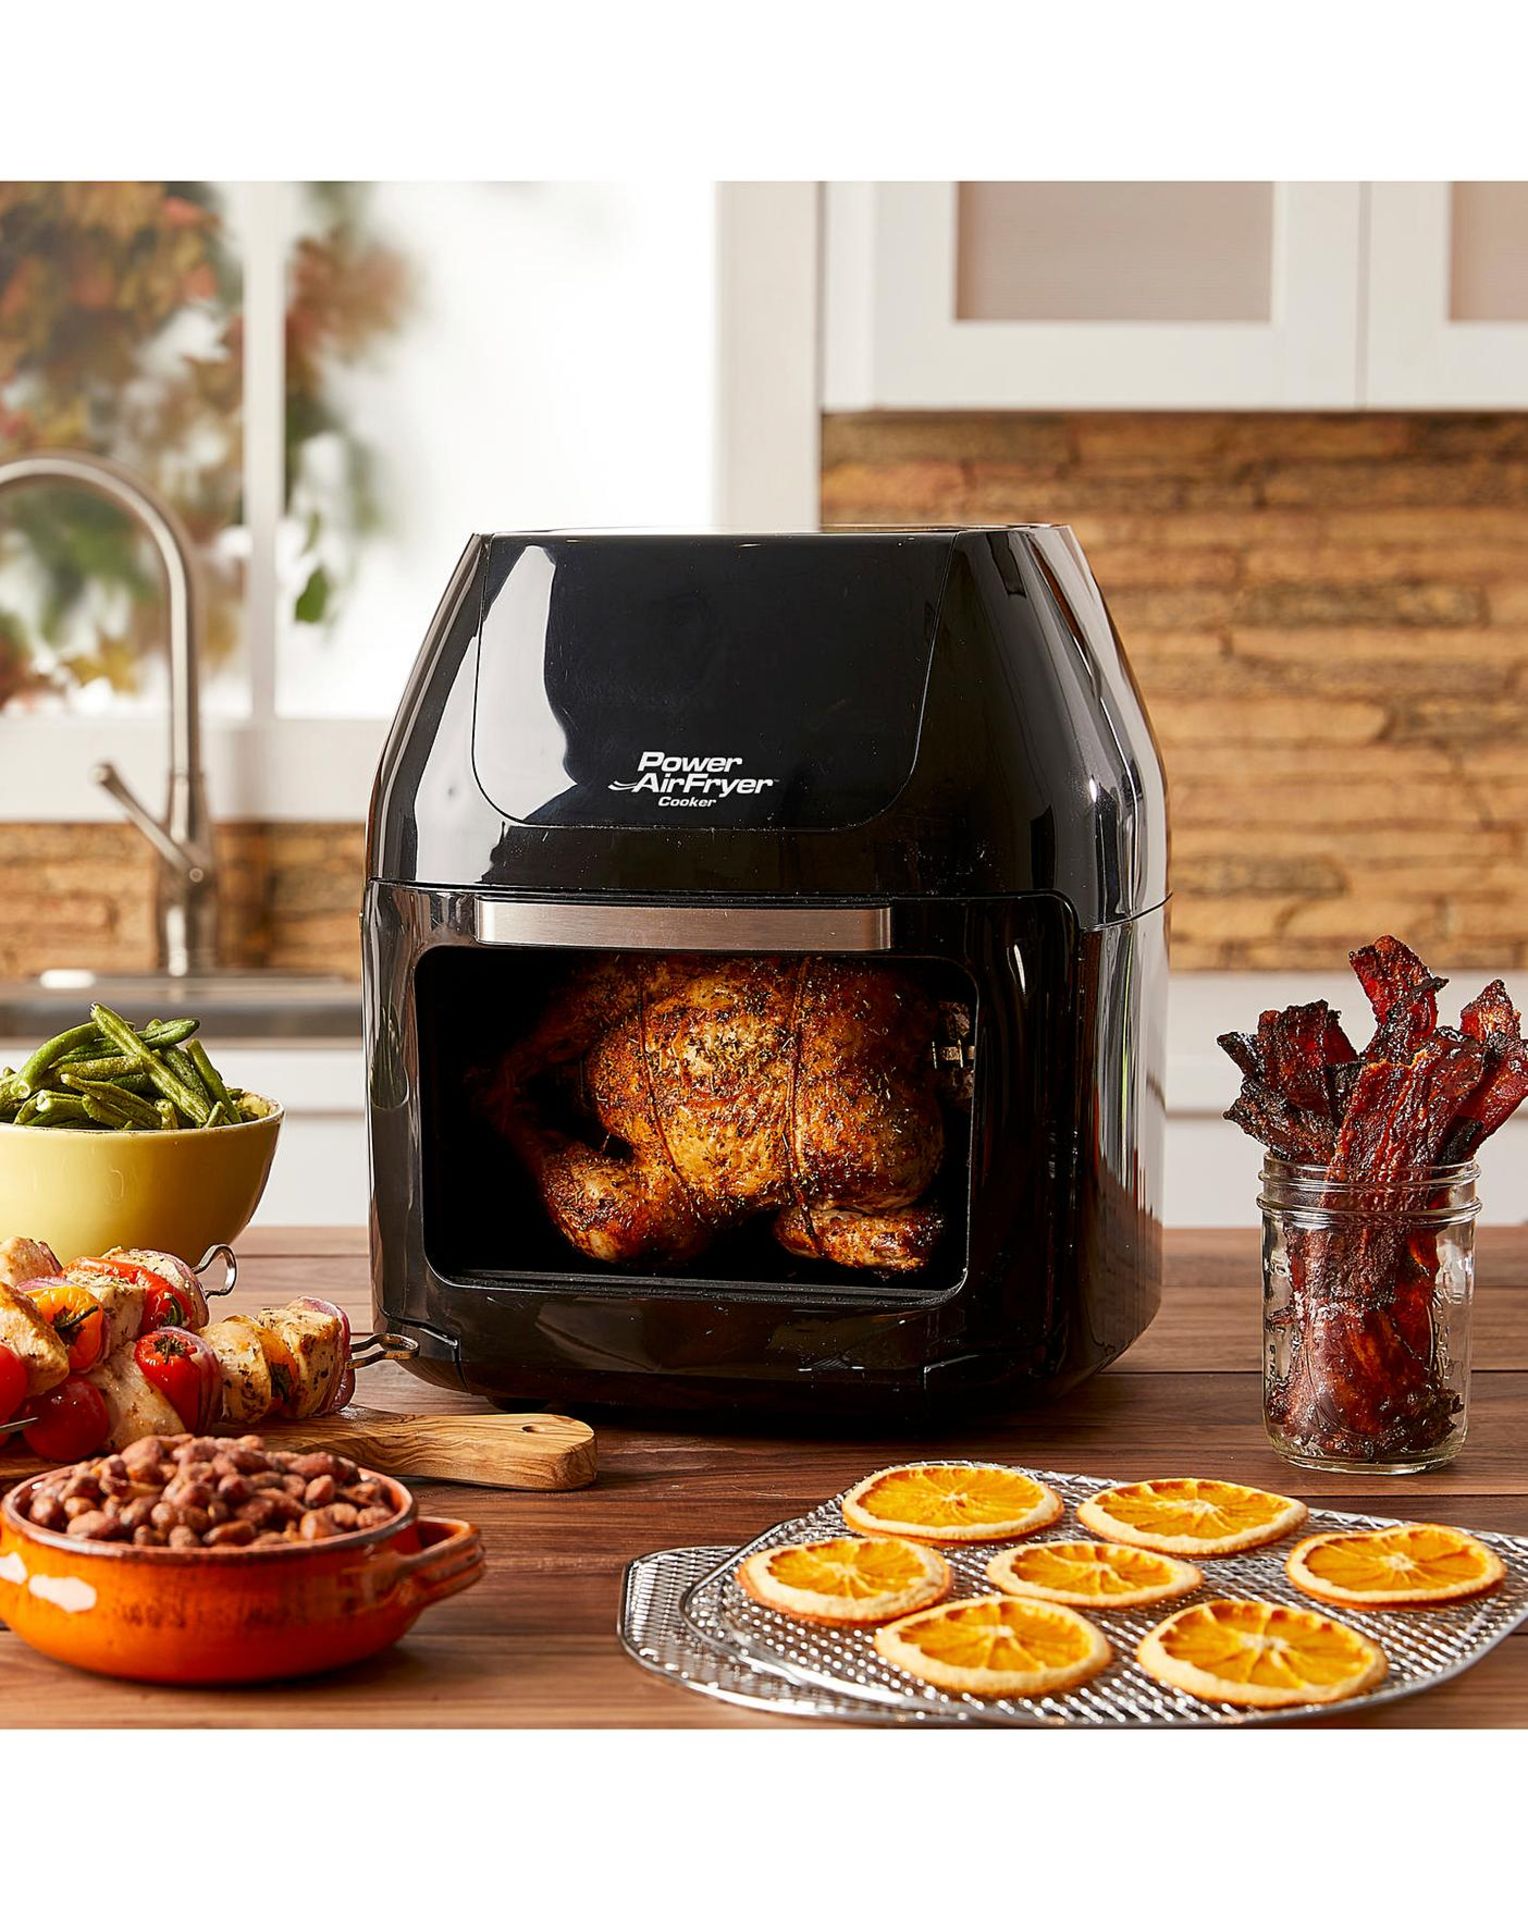 | 1X | POWER AIR FRYER 5.7L | REFURBISHED AND BOXED | RRP £149.99 |